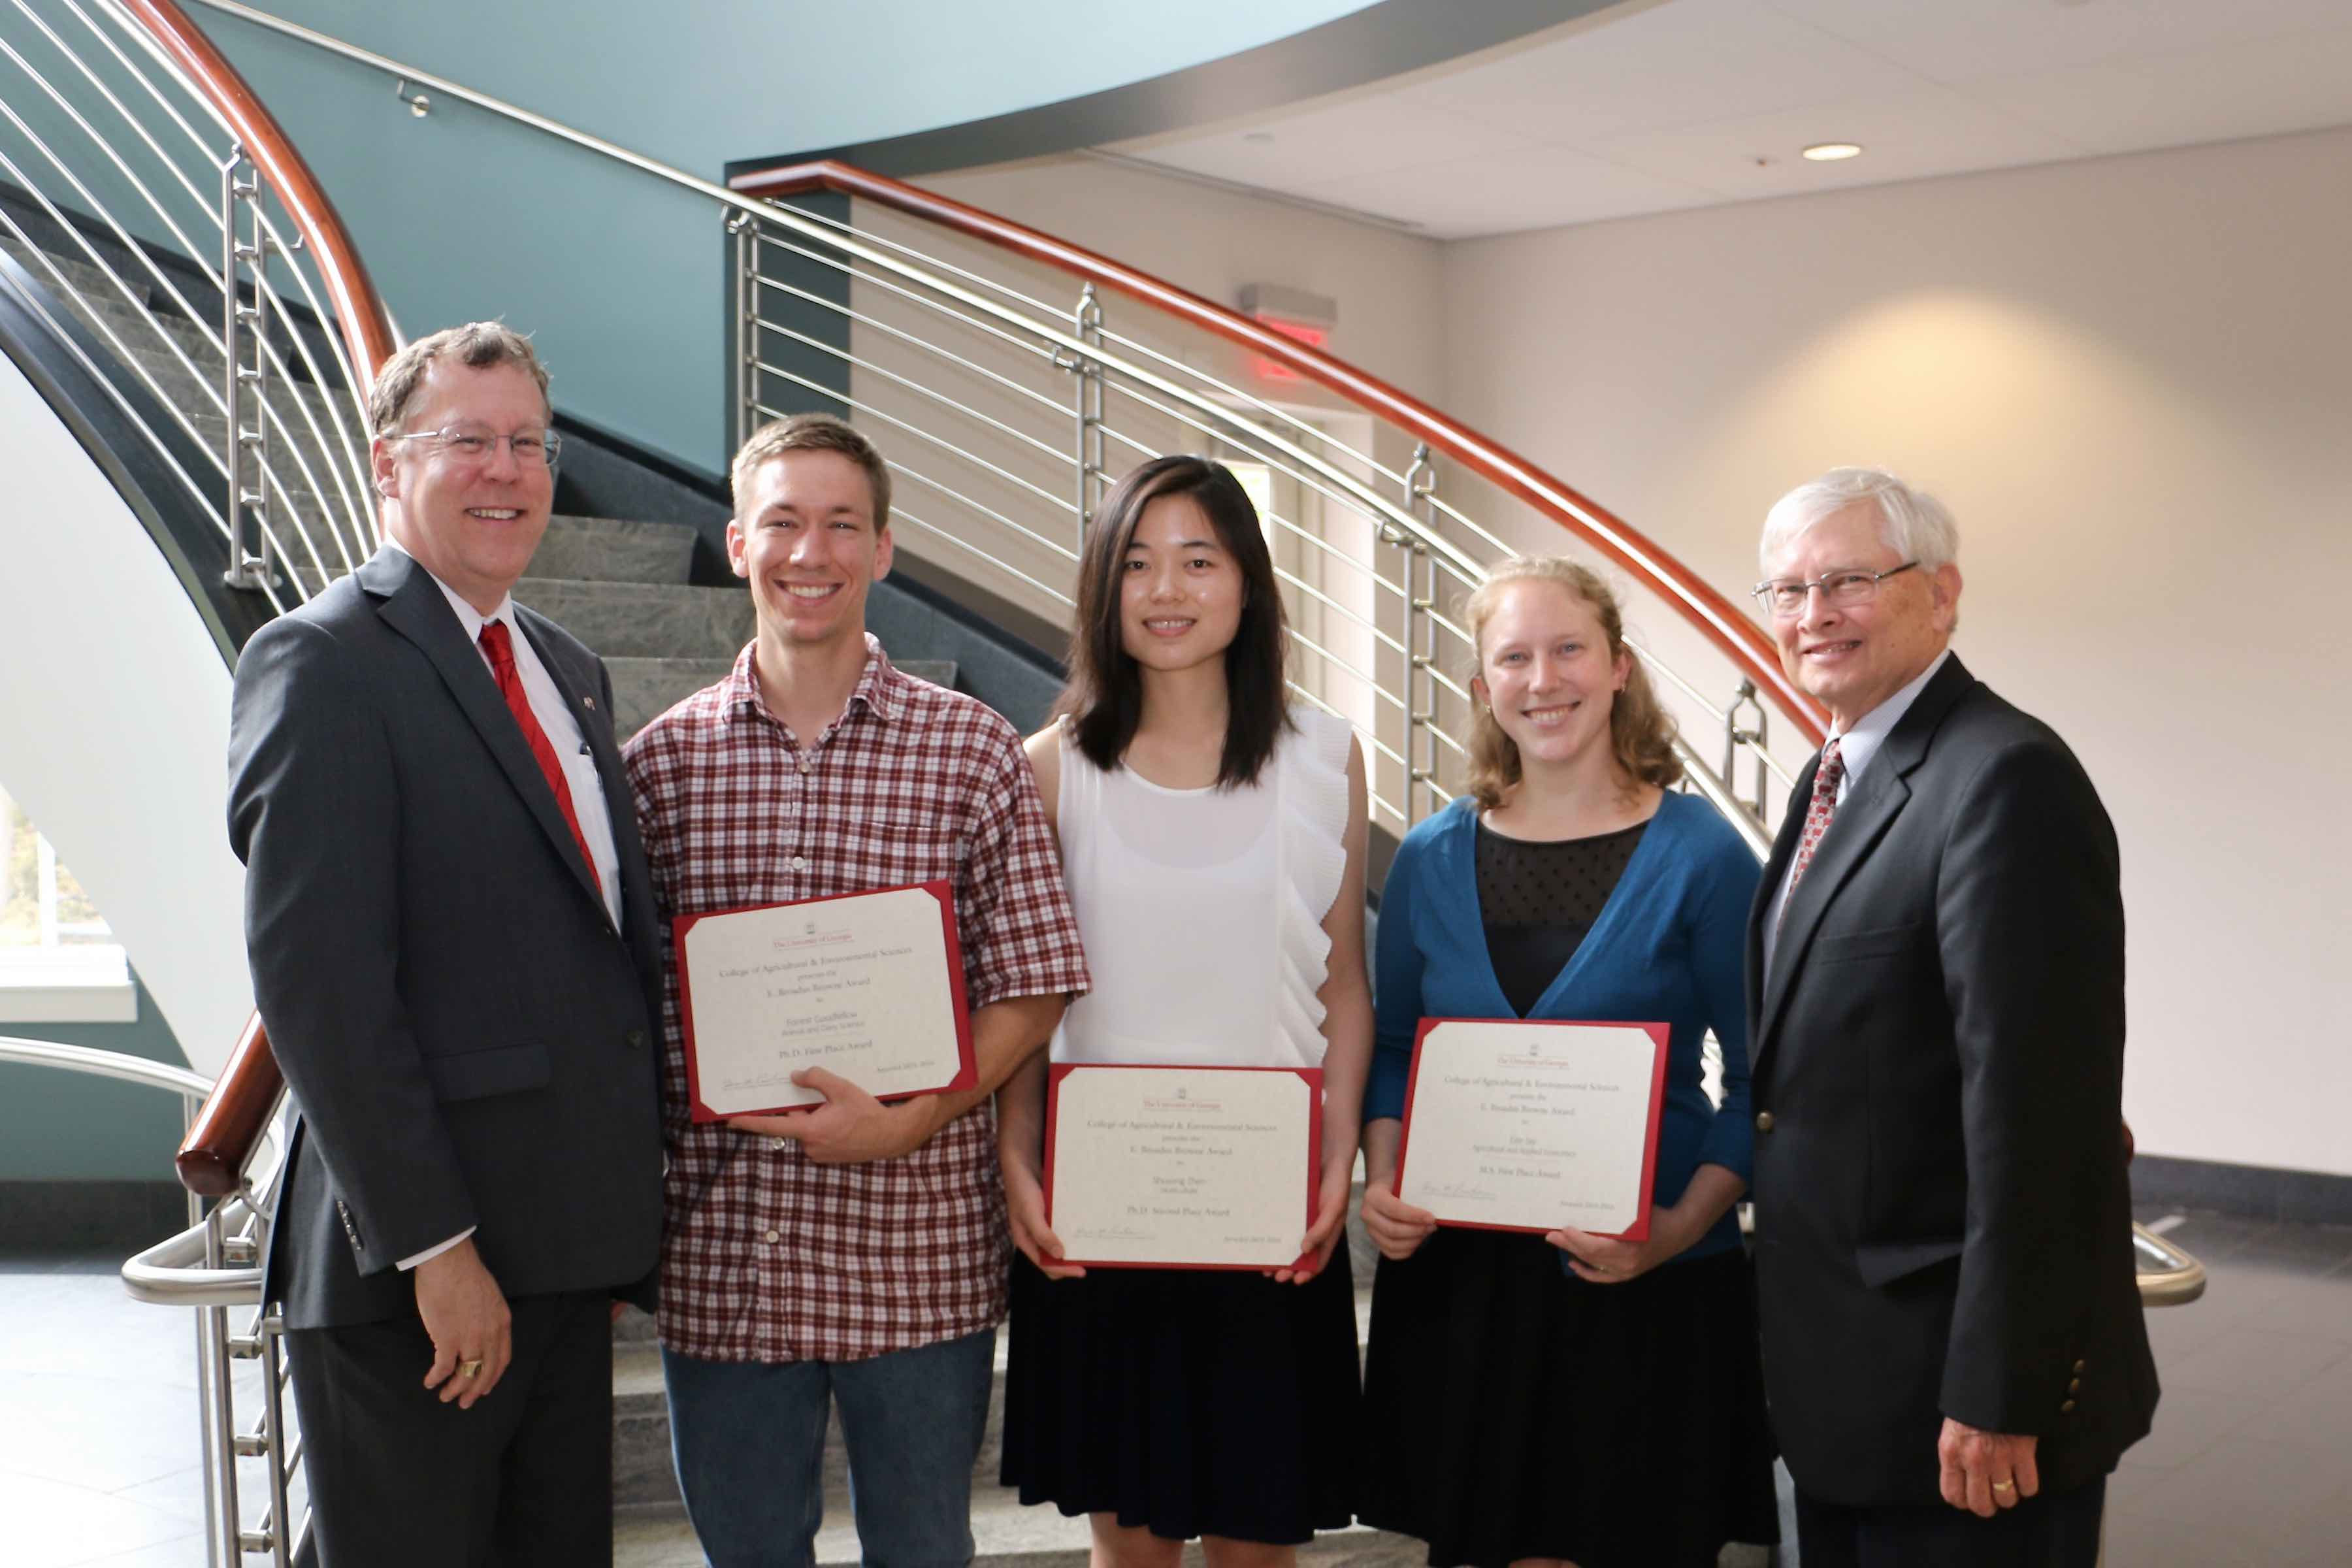 UGA College of Agricultural and Environmental Sciences Dean and Director Sam Pardue, far left, and CAES Associate Dean for Research Bob Shulstad, far right, congratulate doctorate students Forrest Goodfellow and Shuyang Zhen and master's degree student Erin Roestshcehl on their E. Broadus Browne Awards for creative research.